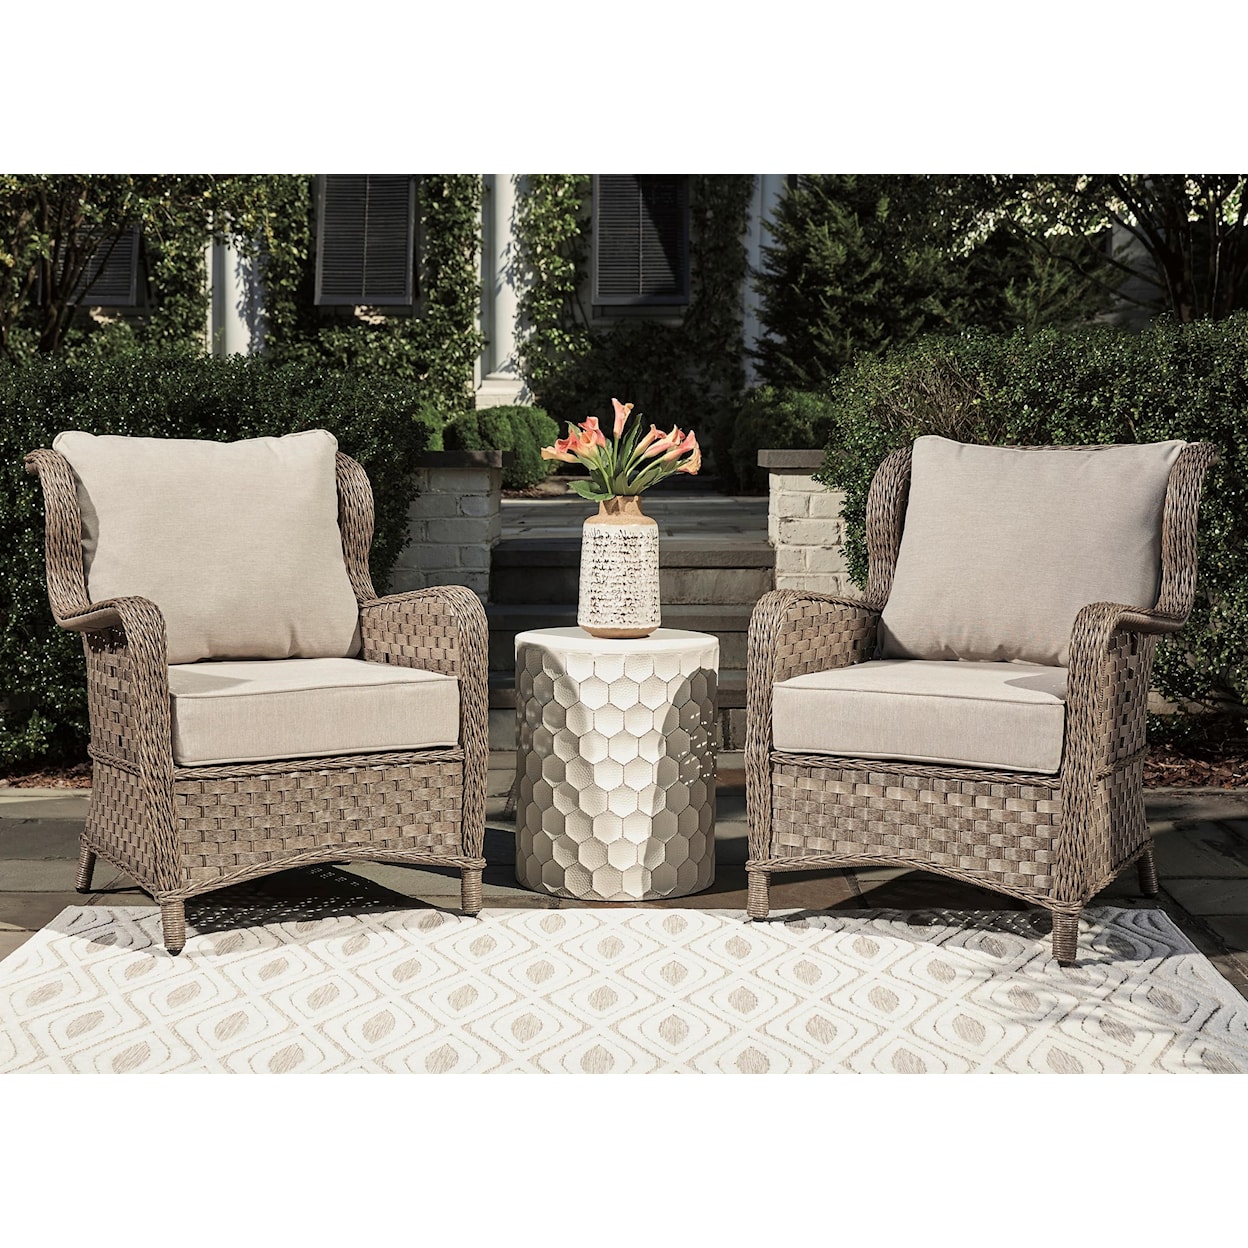 Signature Design by Ashley Clear Ridge Set of 2 Lounge Chairs w/ Cushion